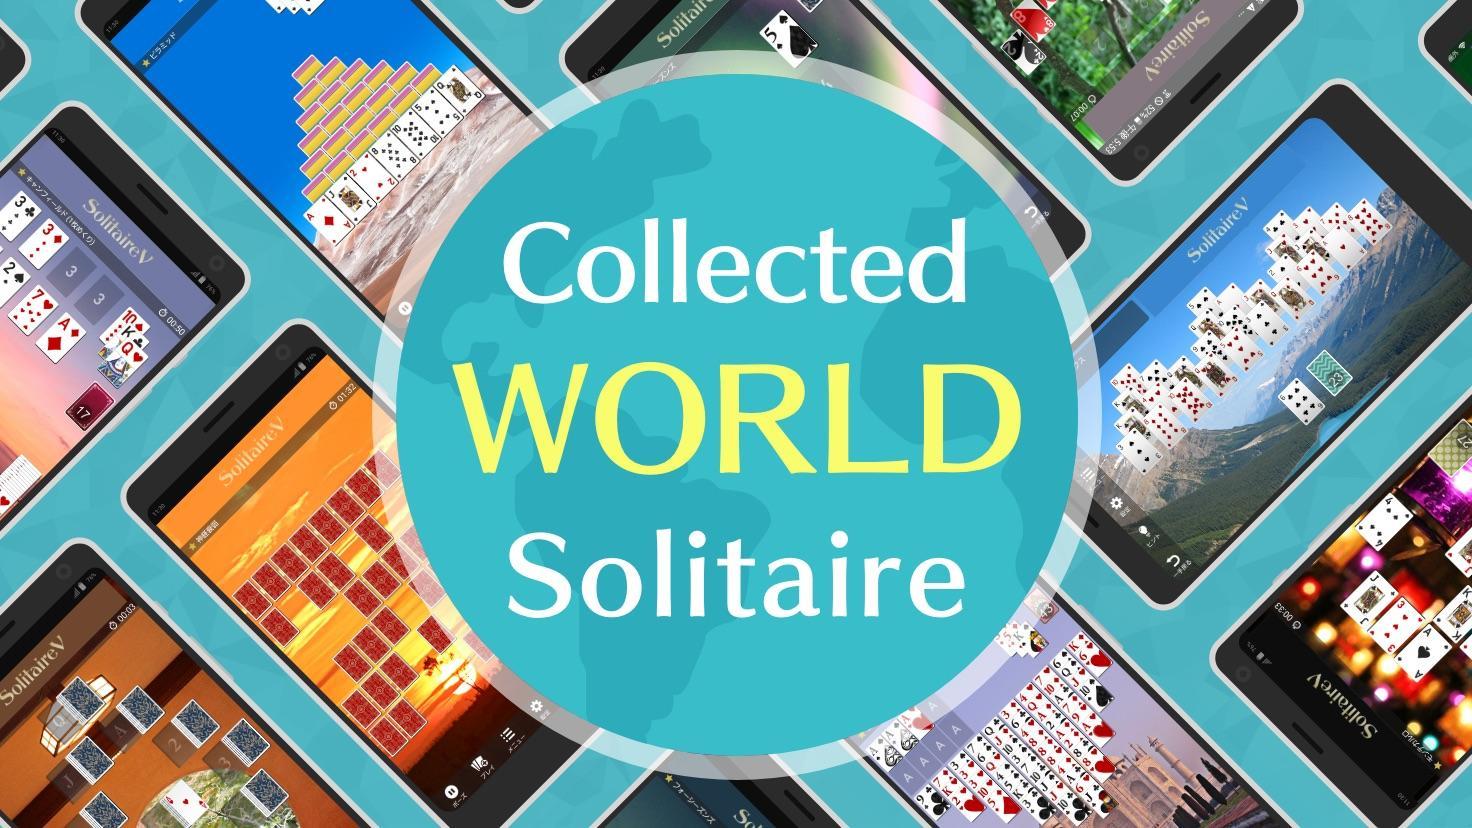 Solitaire Victory - 2020 Solitaire Collection 100+